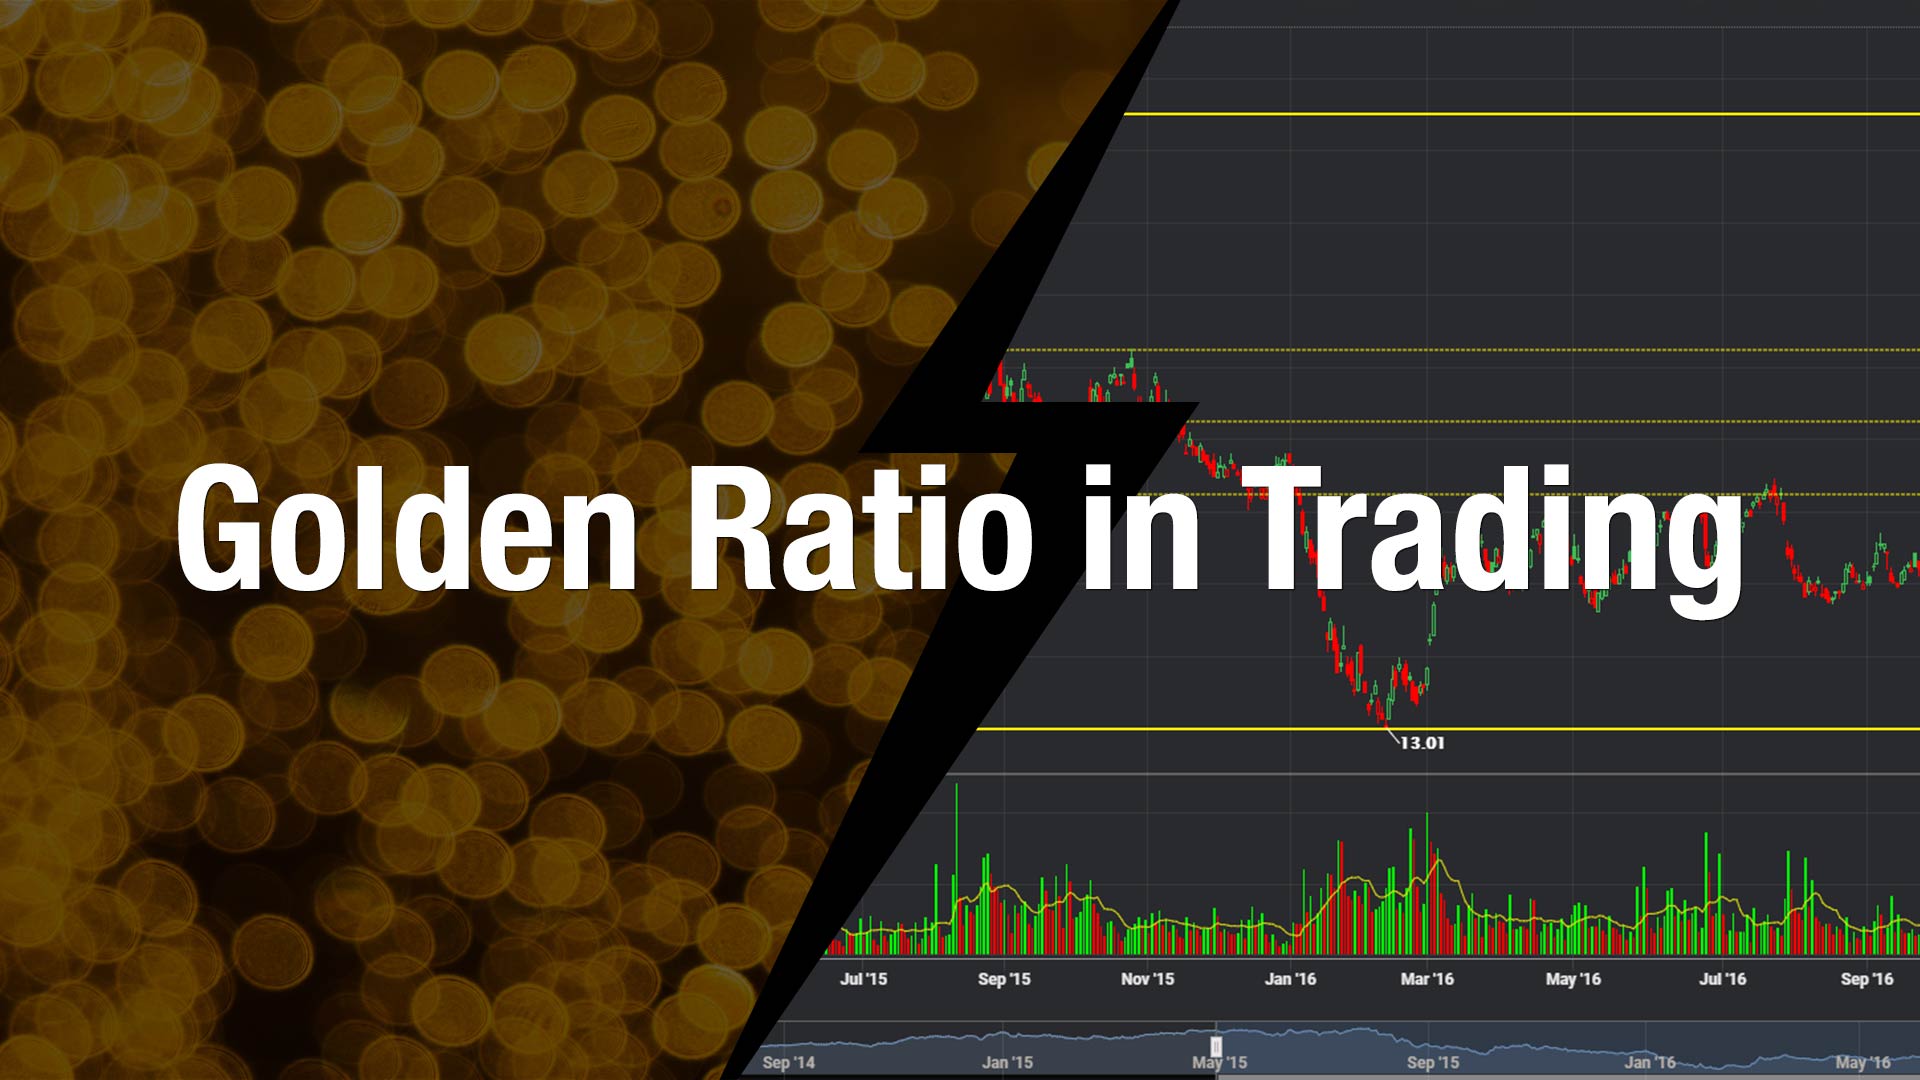 Oil Trading Fibonacci: How to Use the Golden Ratio to Trade Oil